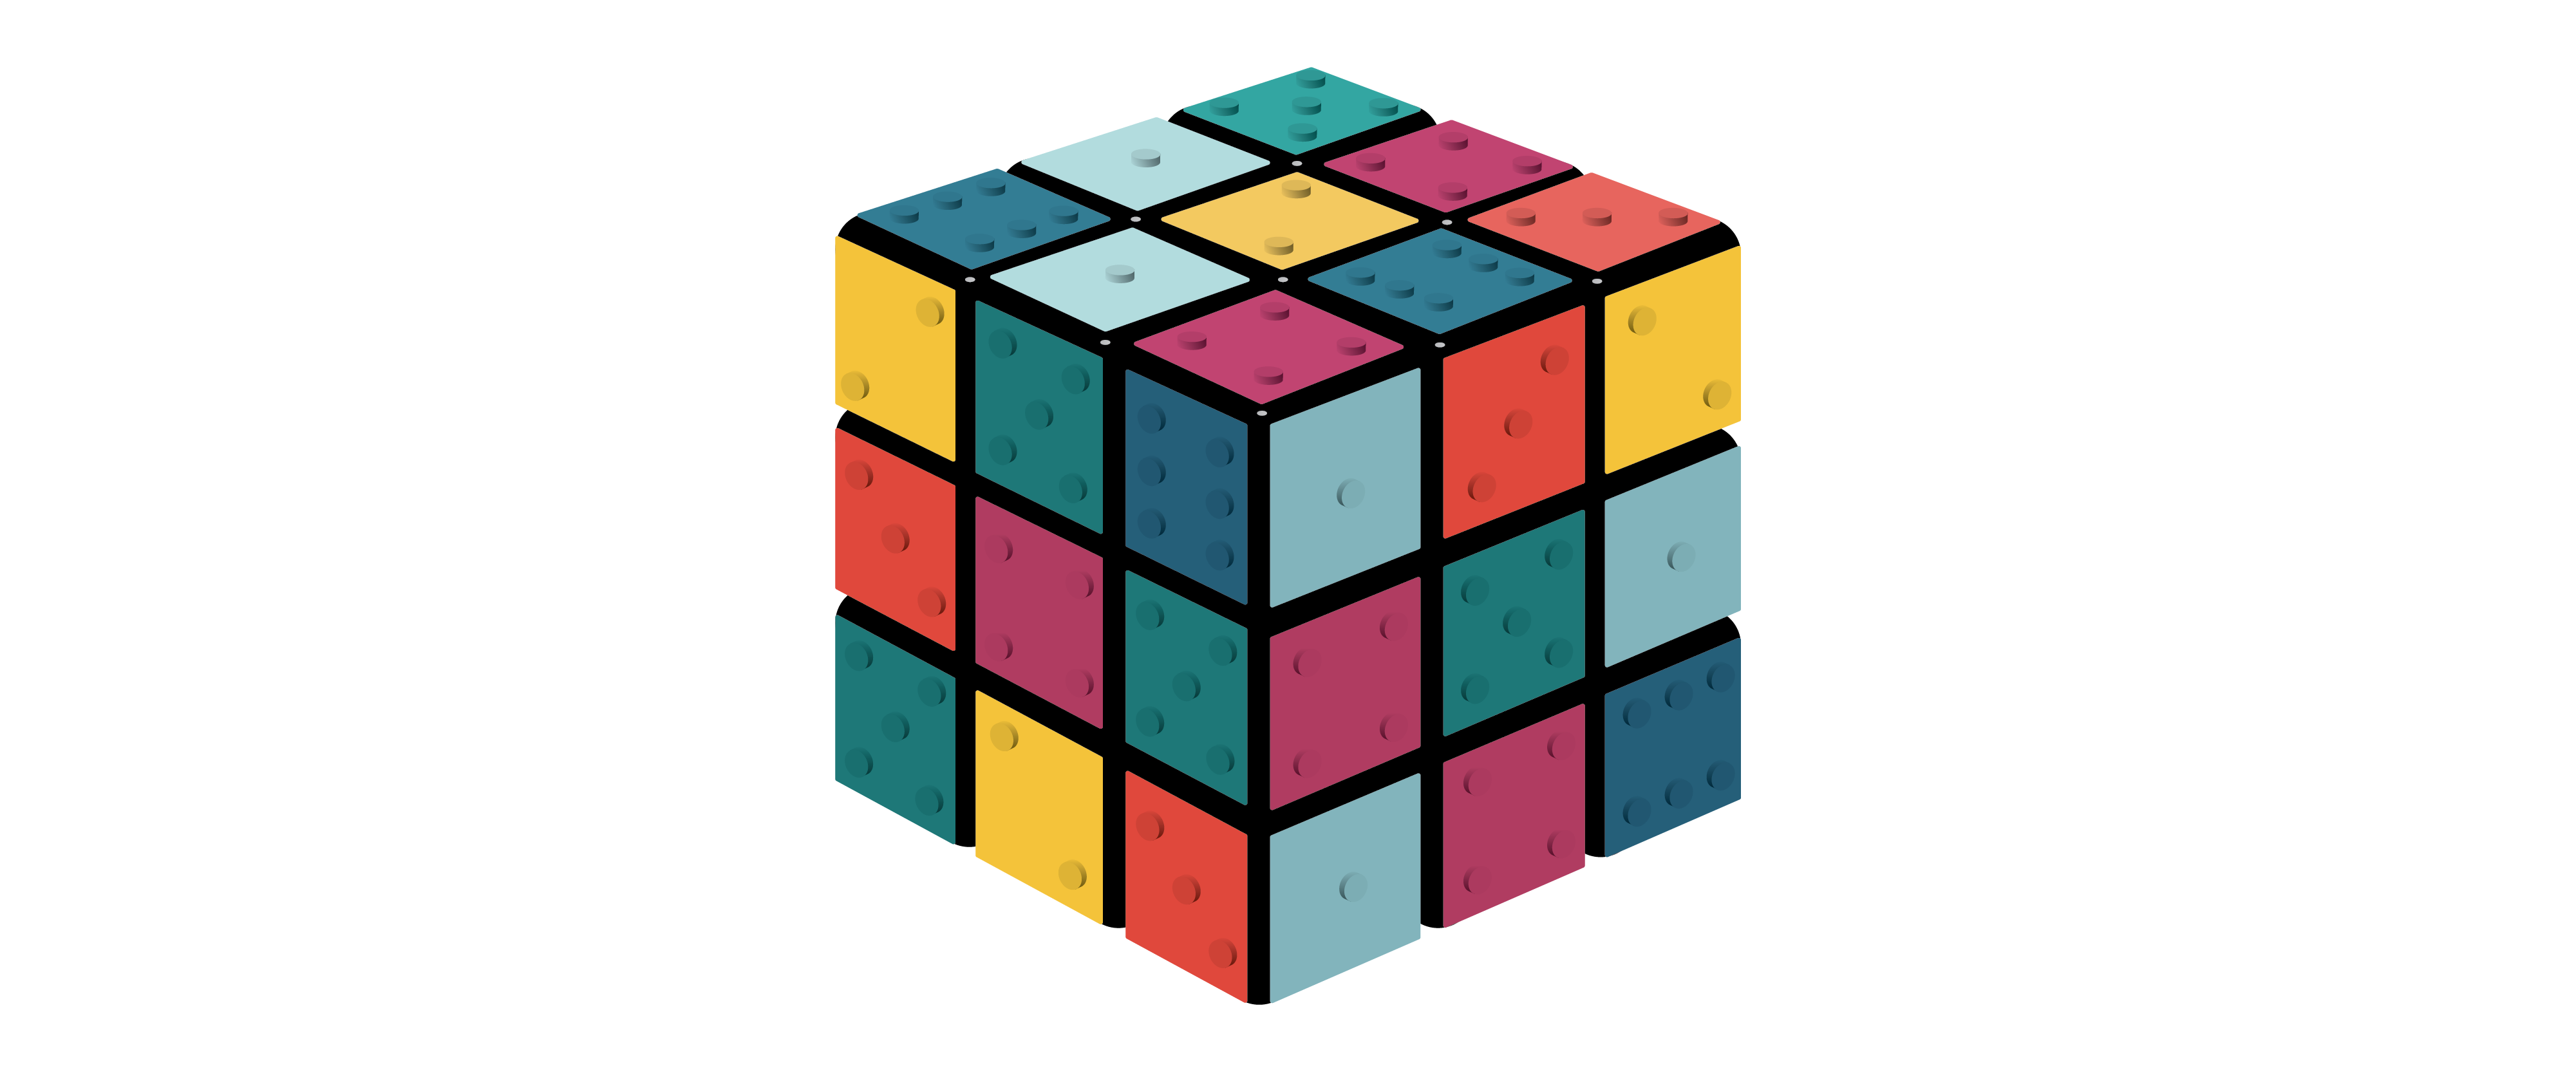 A colourful Rubik's Cube with tactile bumps.